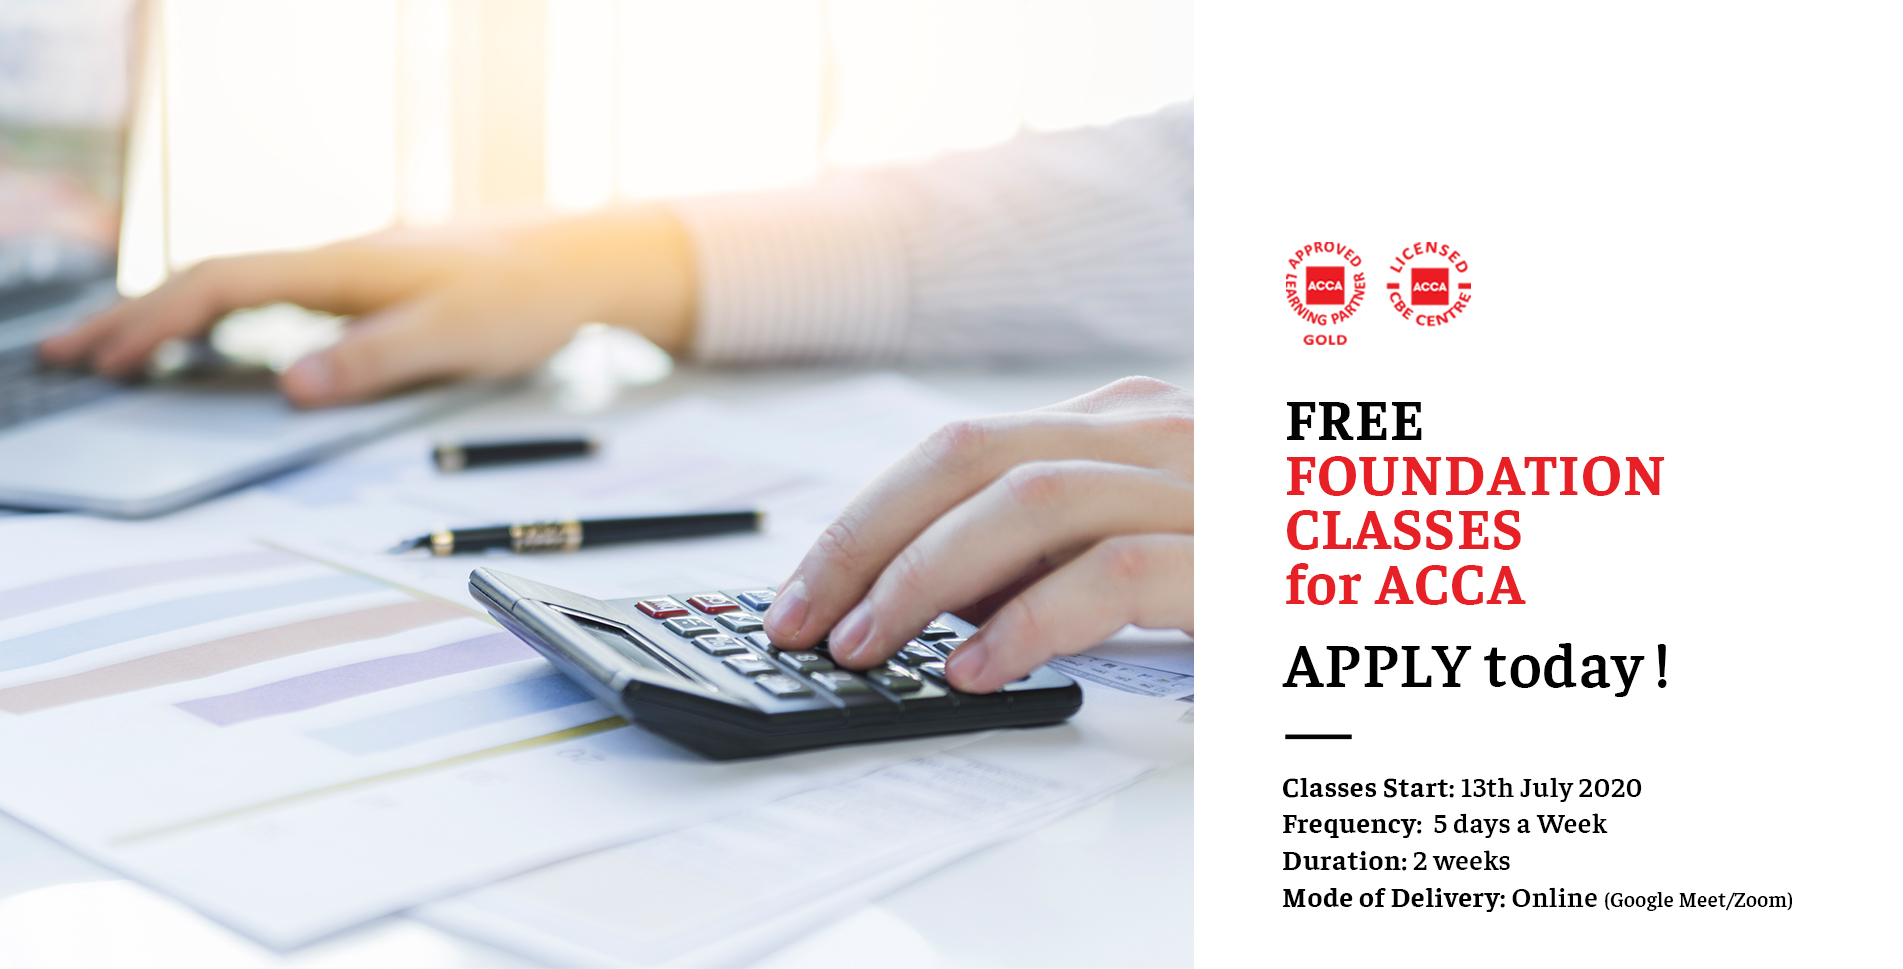 Foundation classes for ACCA